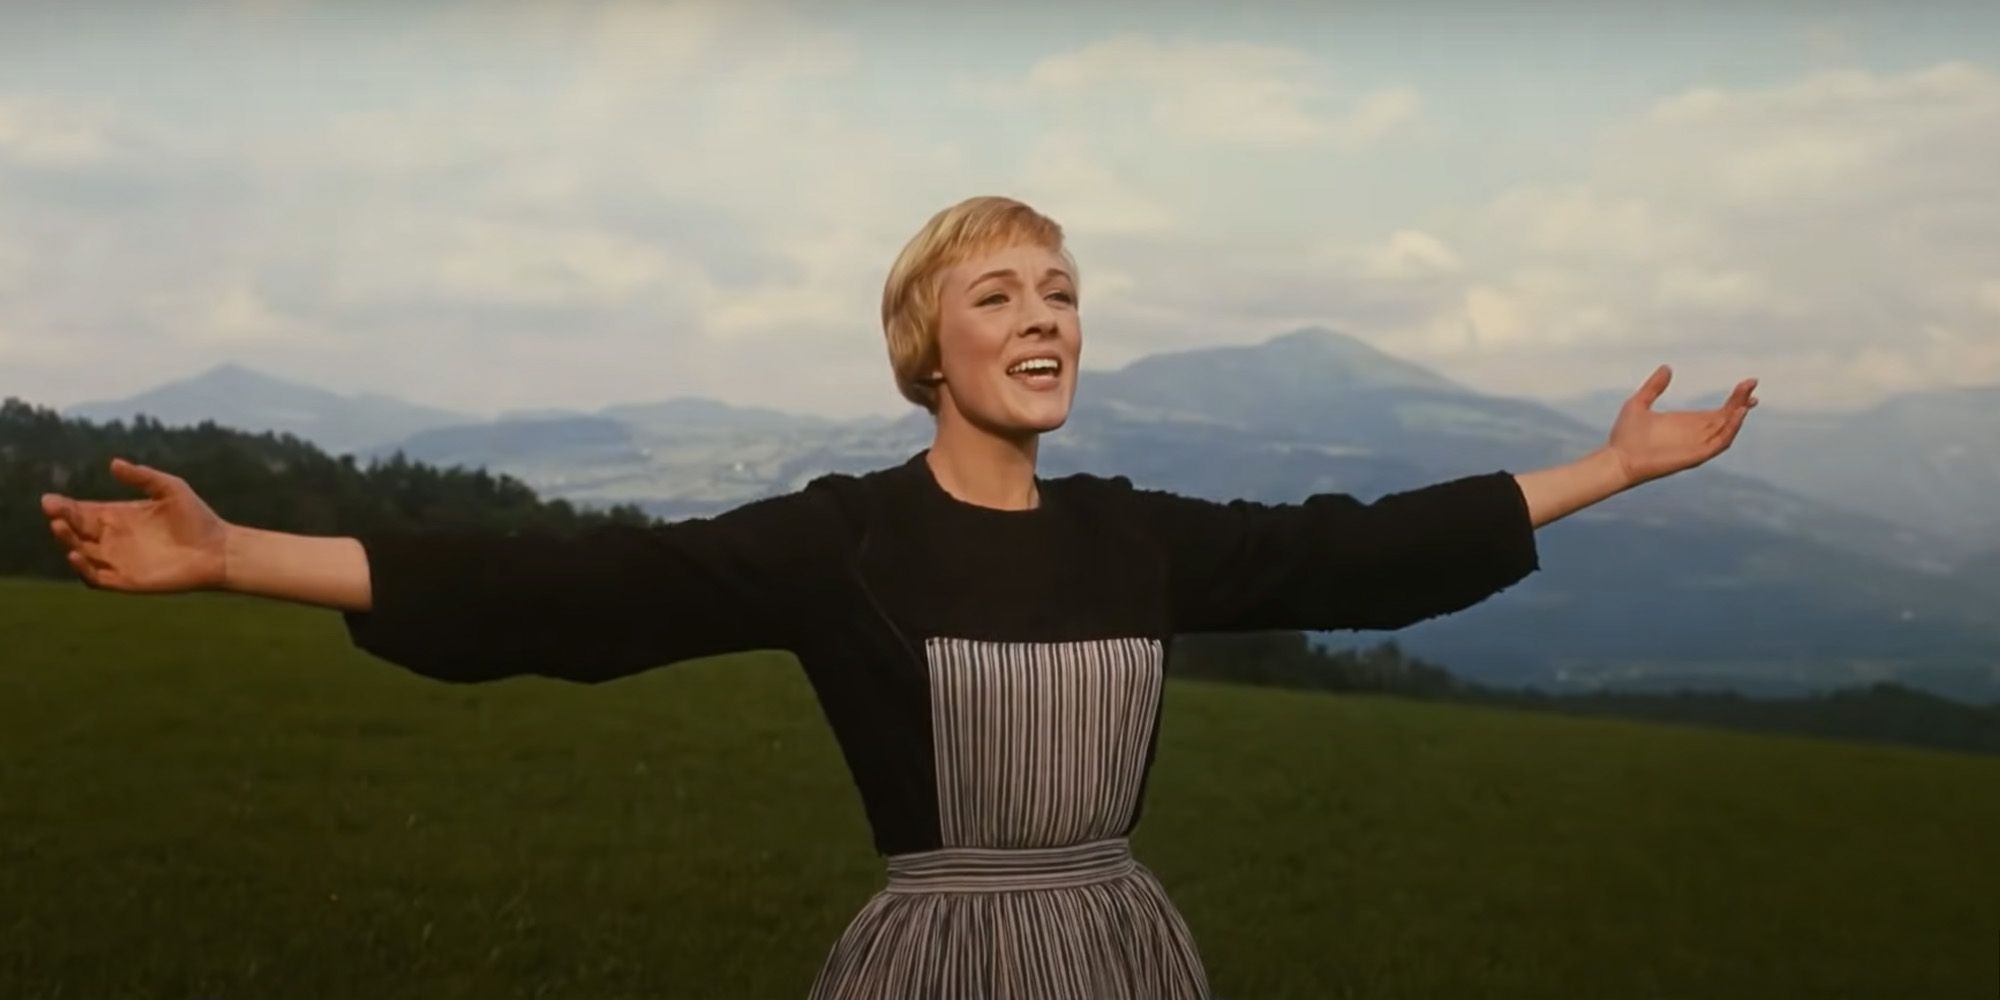 Maria spreading her arms while singing in The Sound of Music